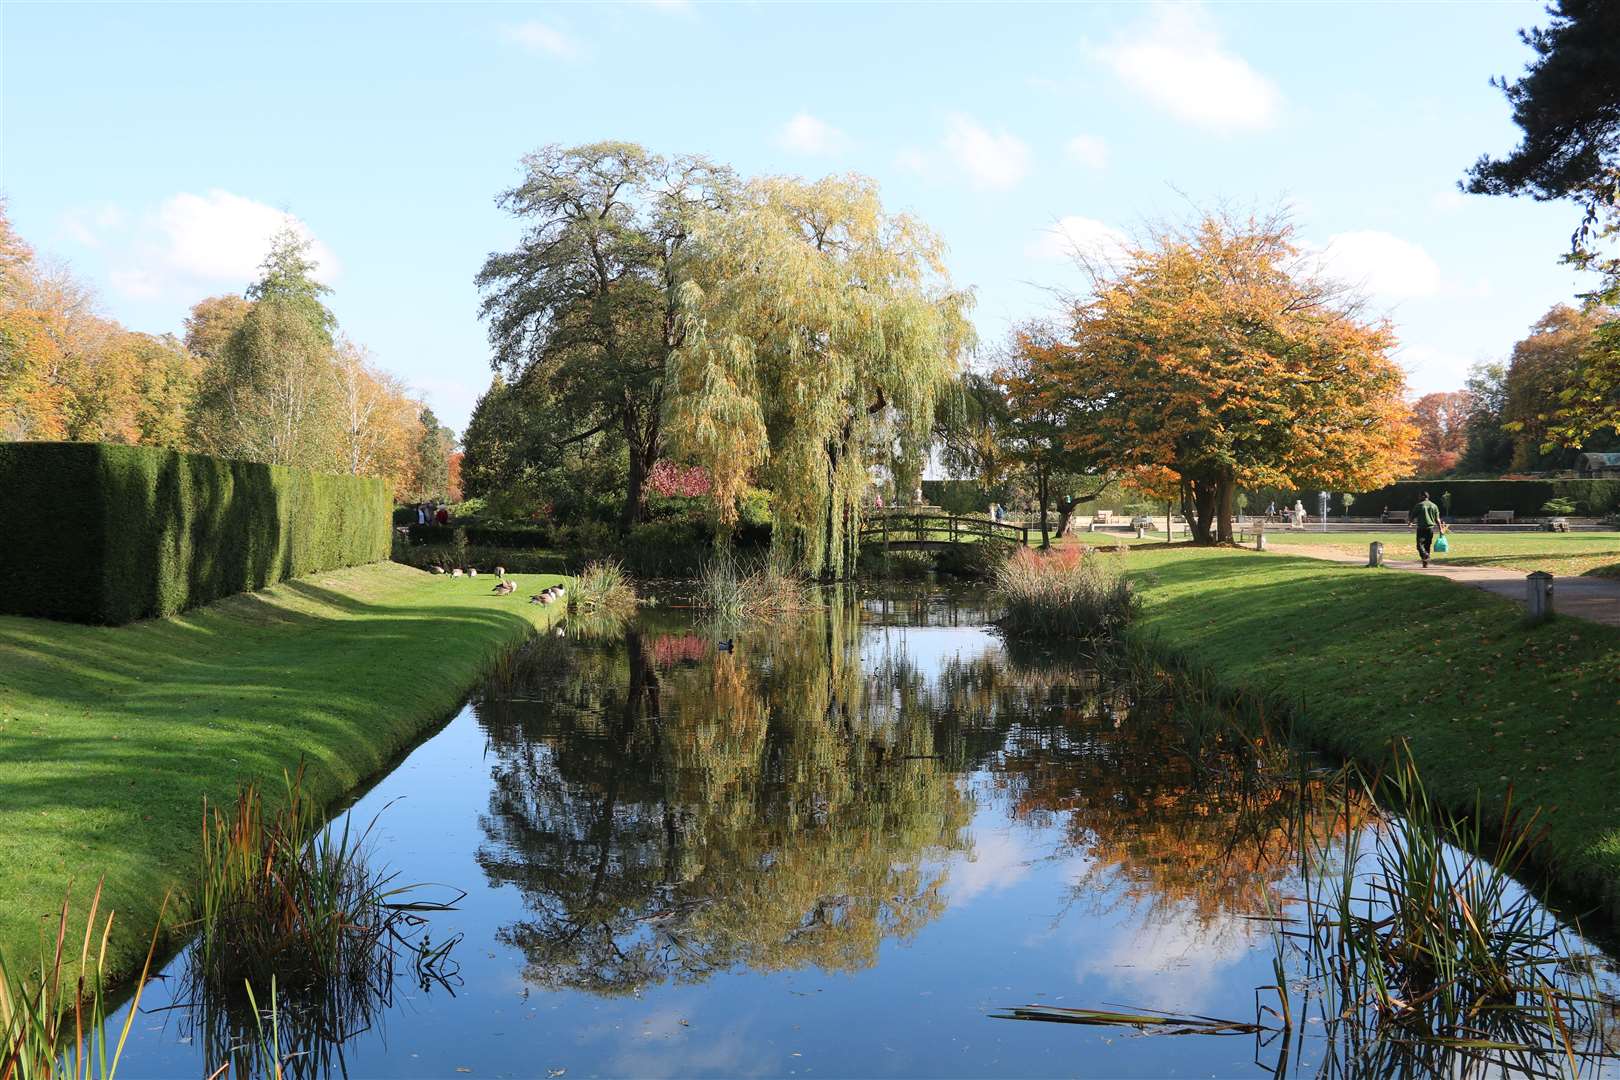 Hever's gardens are open to visitors